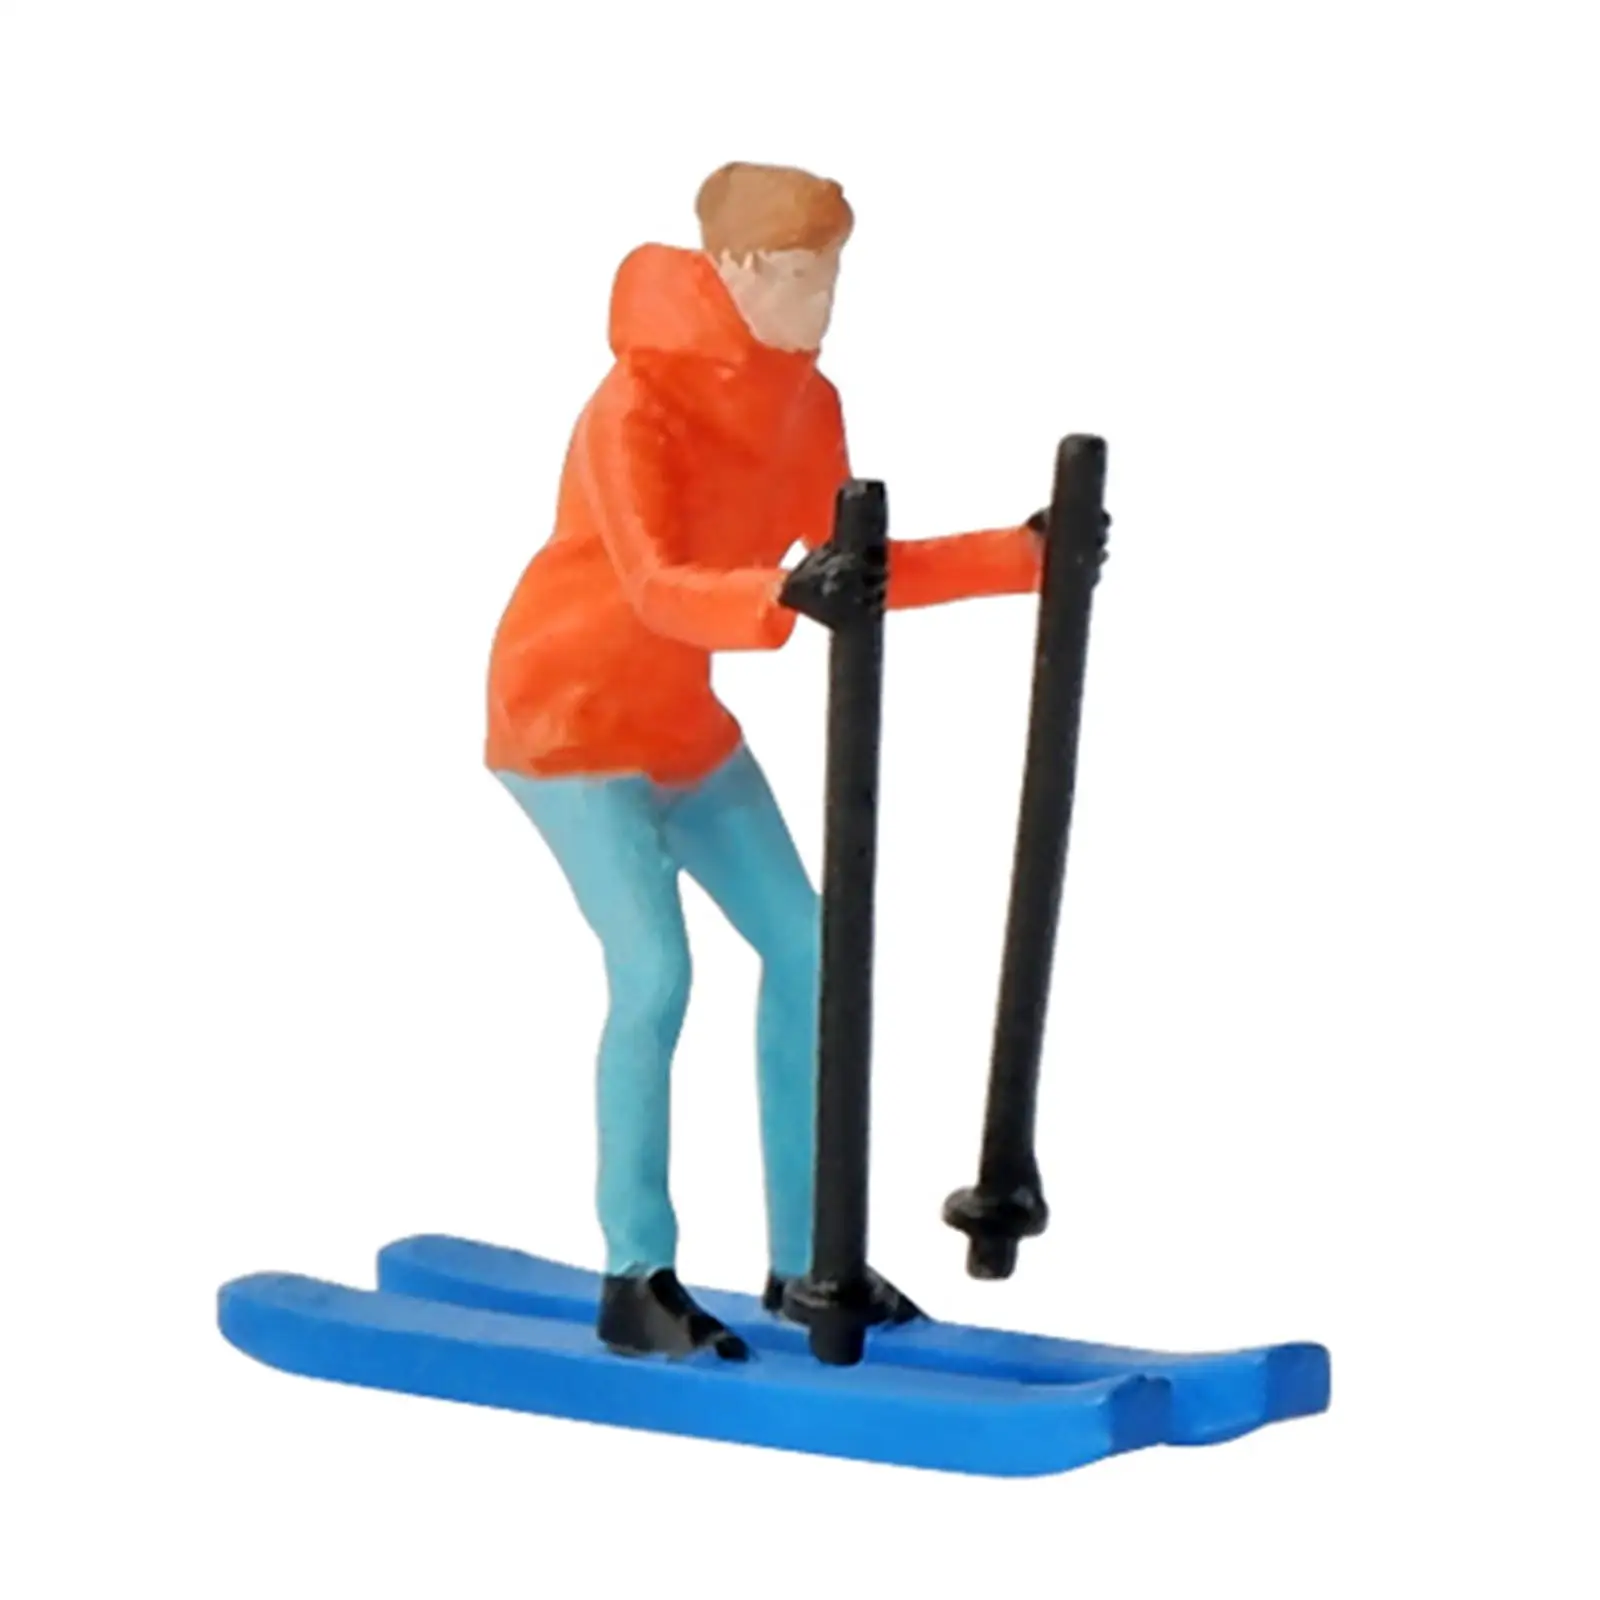 Miniature Model Skiing Figures Skier Figures for DIY Projects Diorama Layout